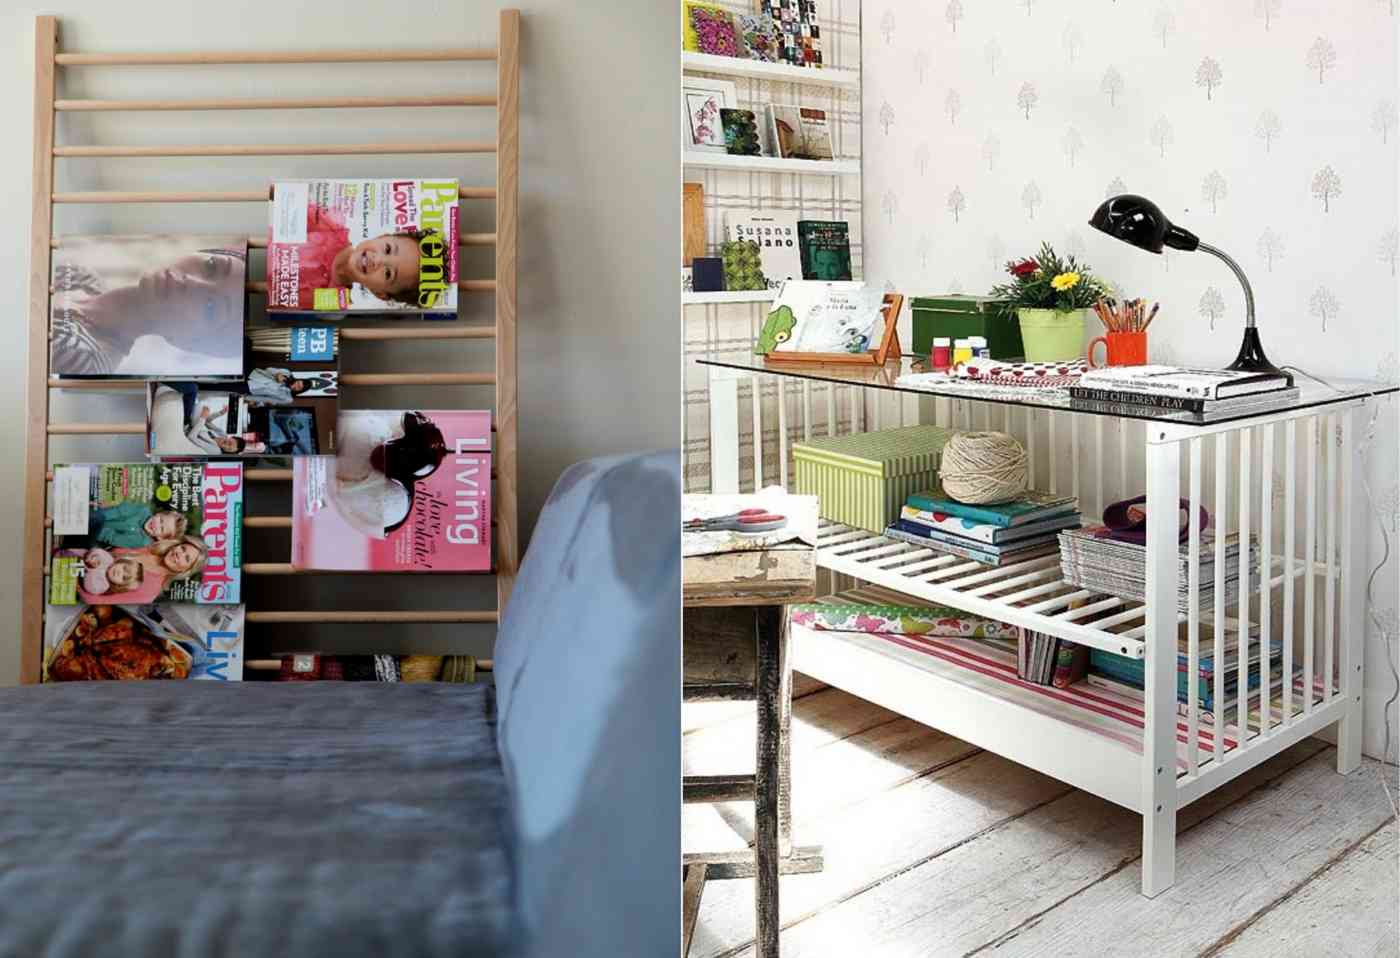 Home with DIY Furniture from Baby and Baby Beds - Stands for Magazines and Glasses